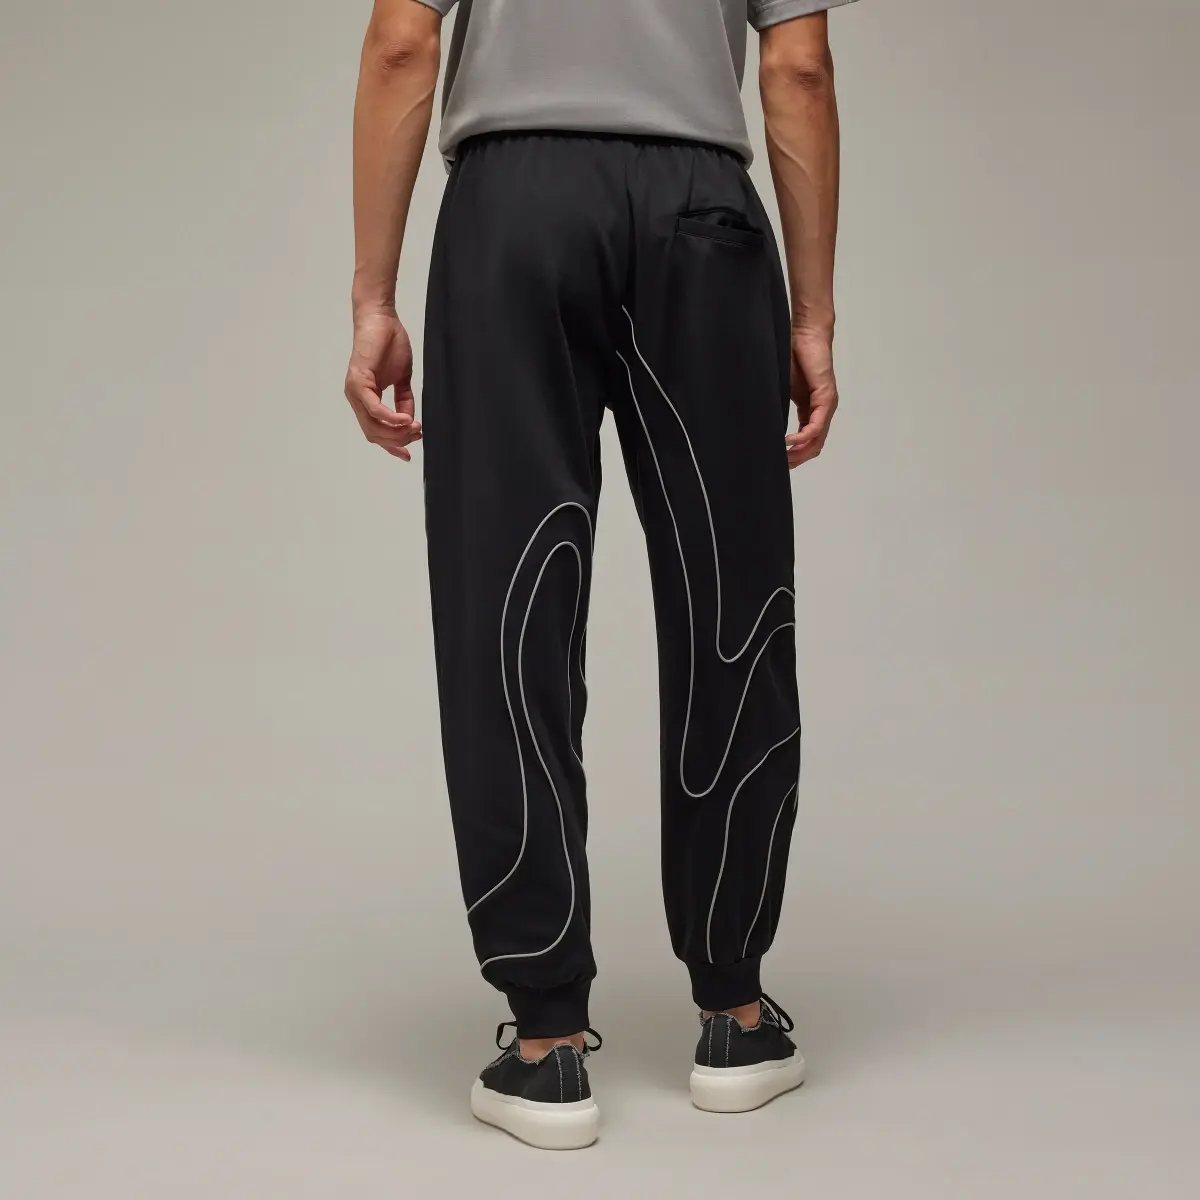 Adidas Y-3 Tracksuit Bottoms. 3